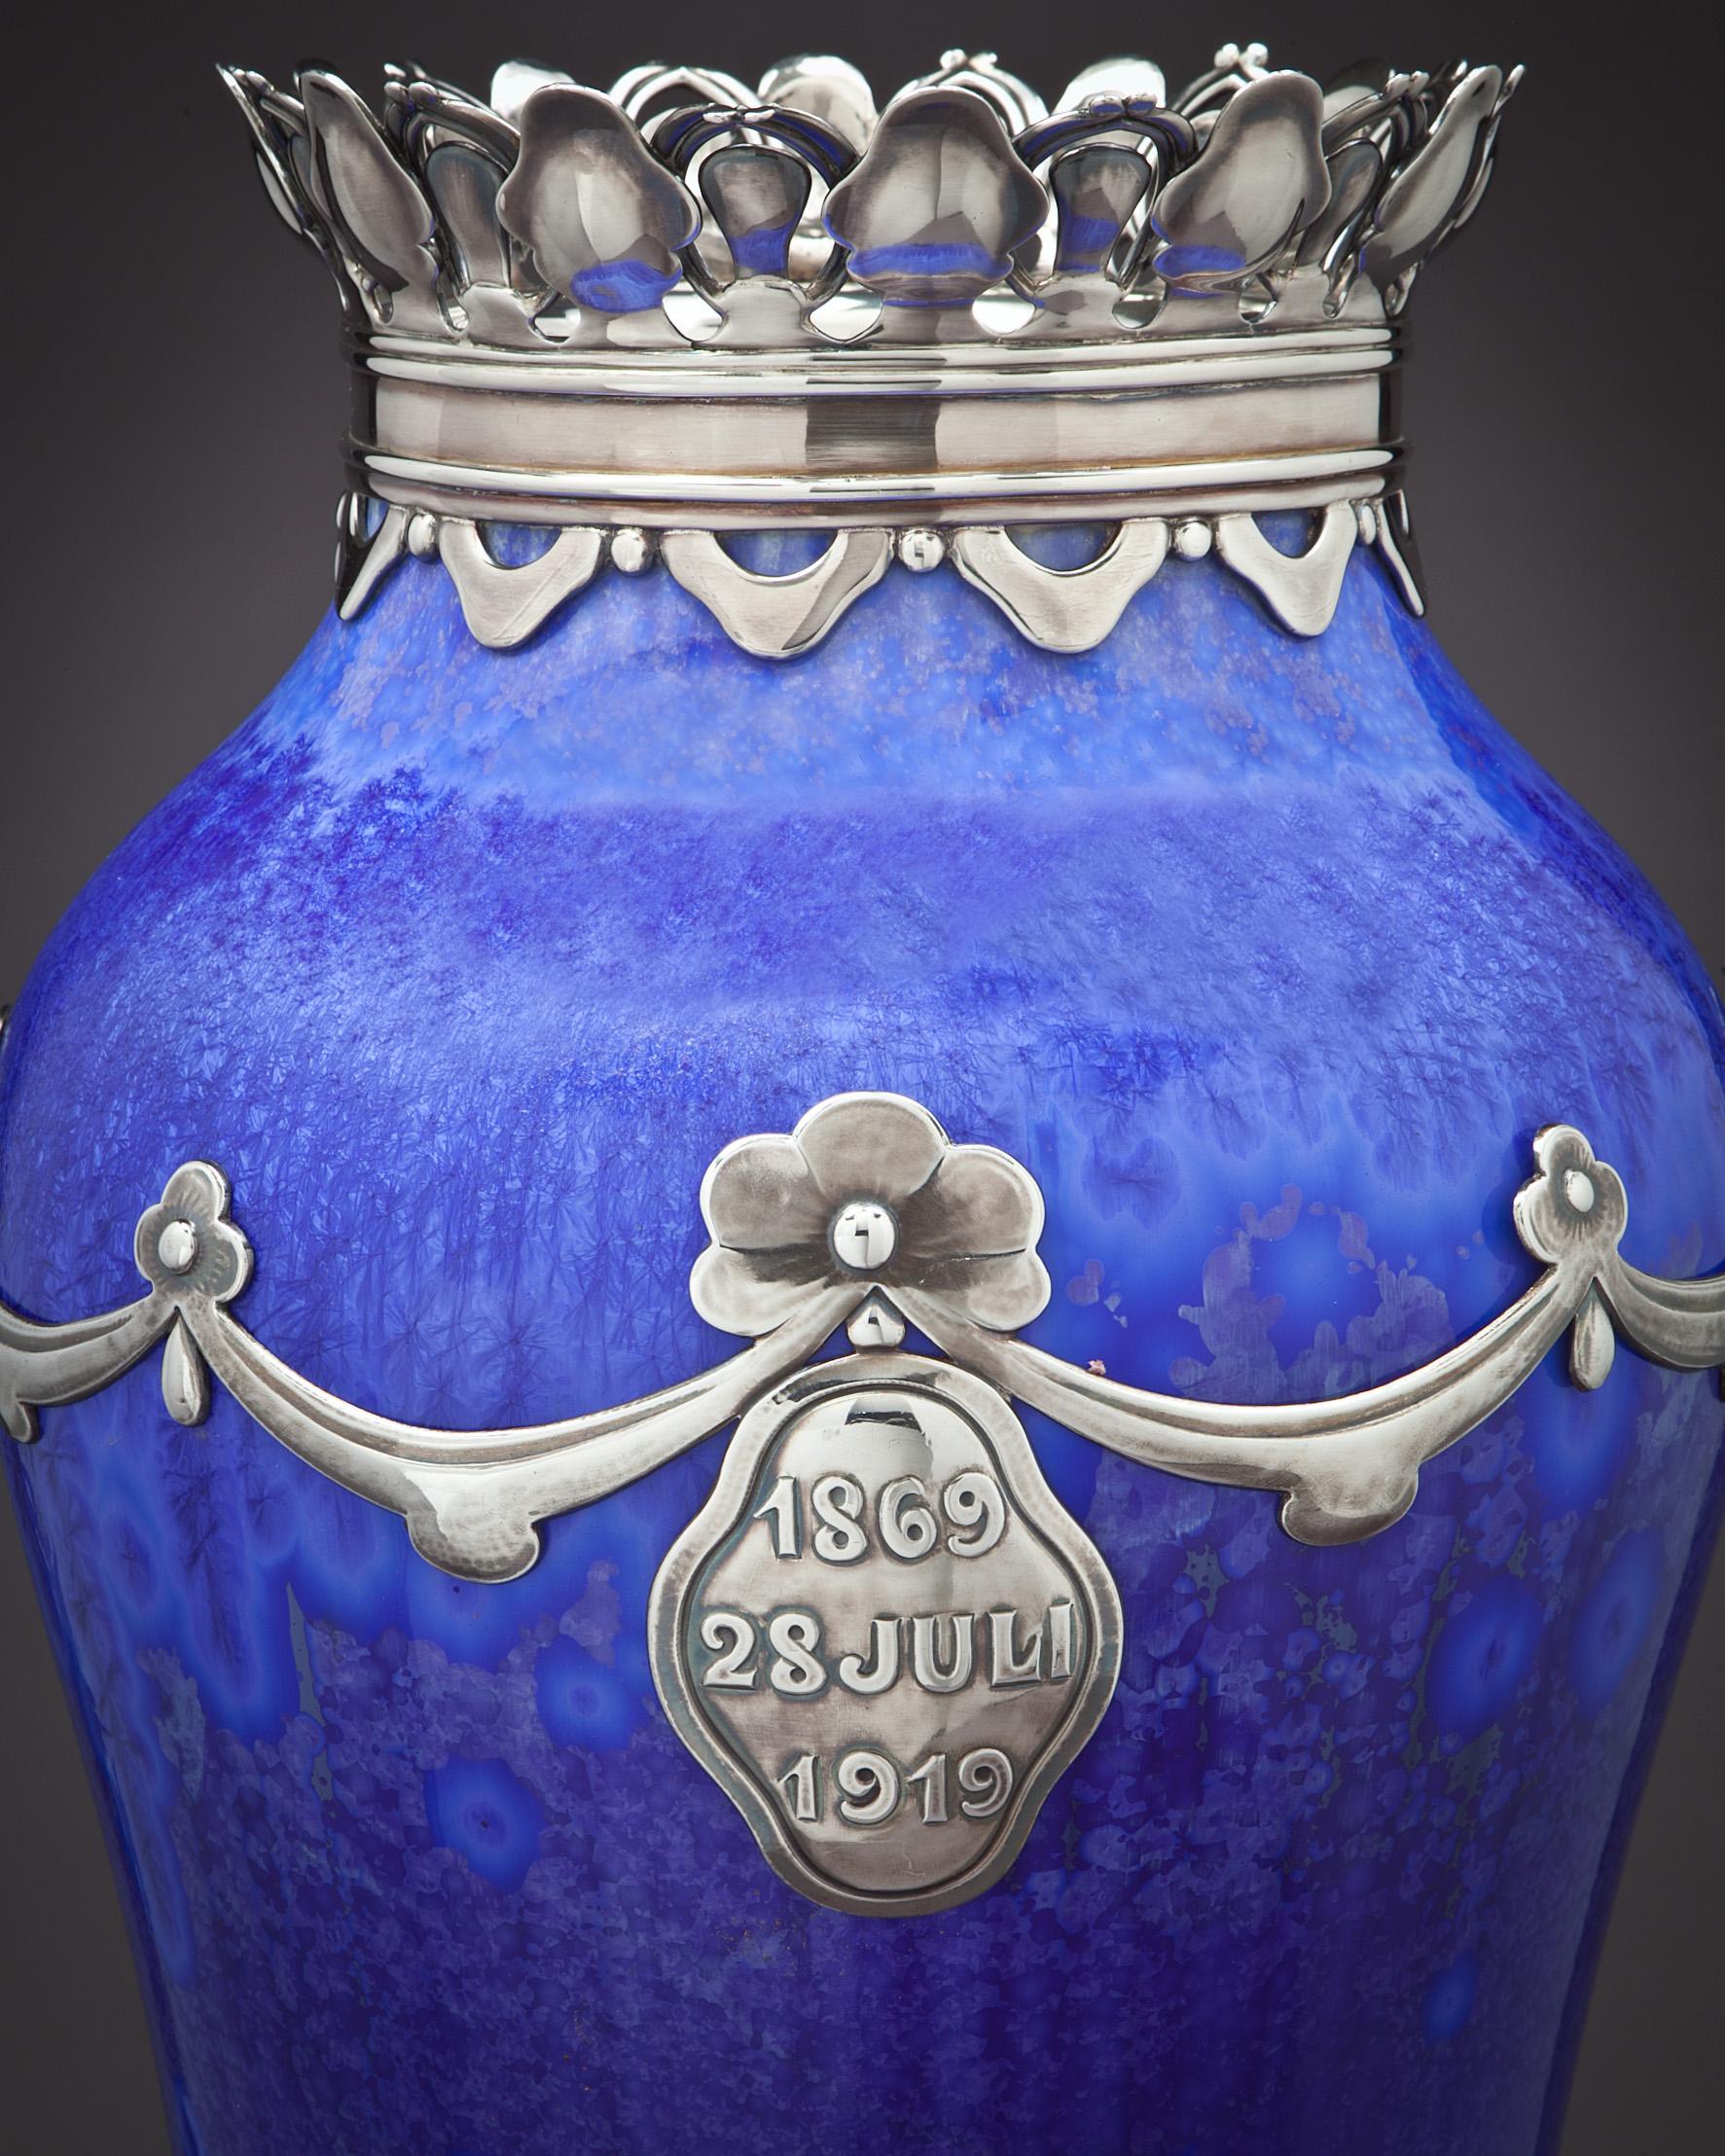 Royal Copenhagen crystalline vase, signed Valdemar Engelhardt, the silver was made by The Royal Silversmith Michaelson.

Presentation to Dowager Queen Louise, widow of King Frederick the 8th of Denmark, on the occasion of her 50th anniversary as a